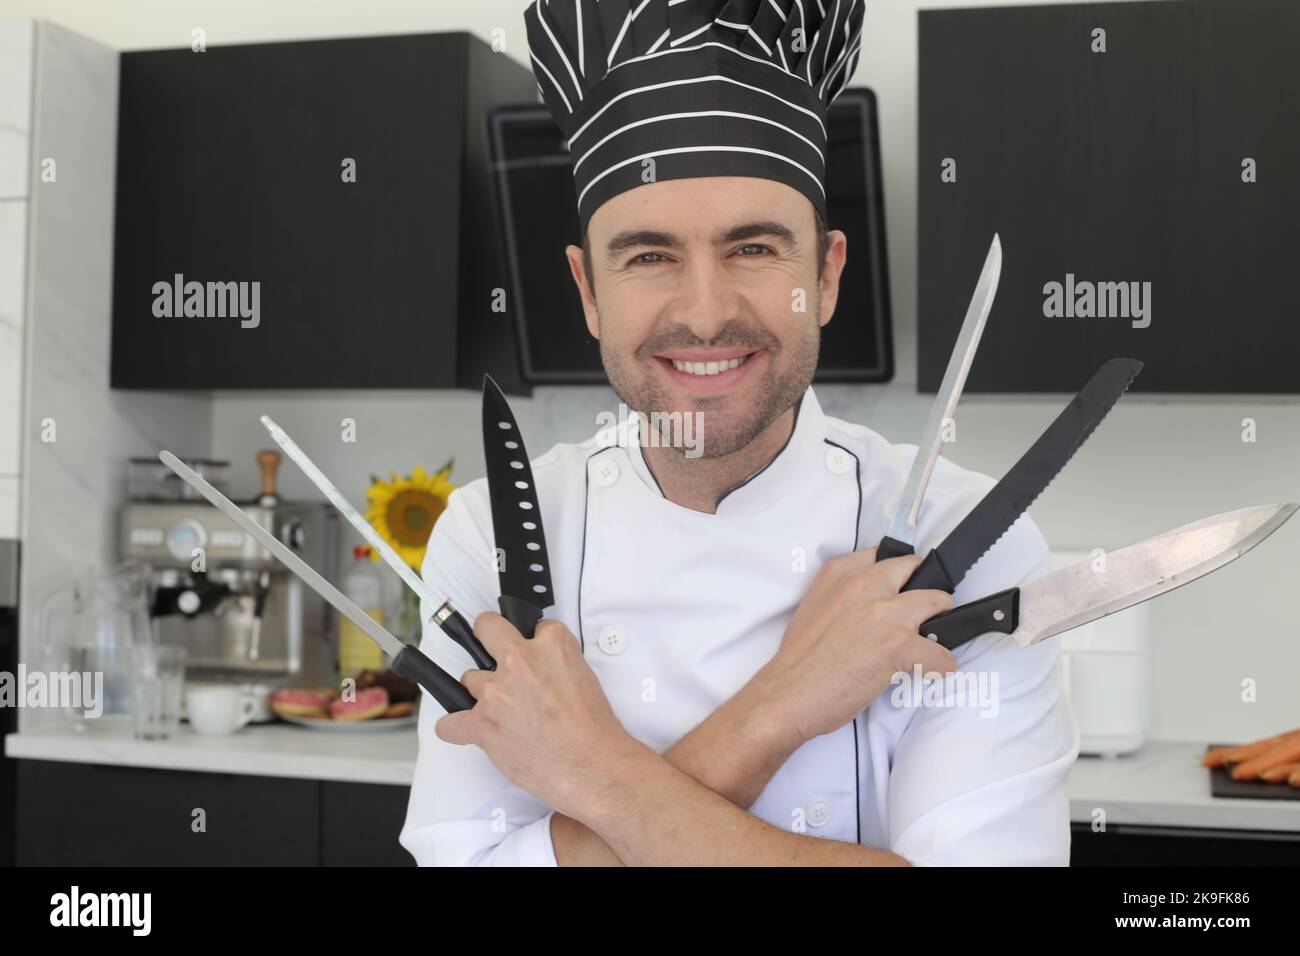 Chef holding a bunch of knives Stock Photo